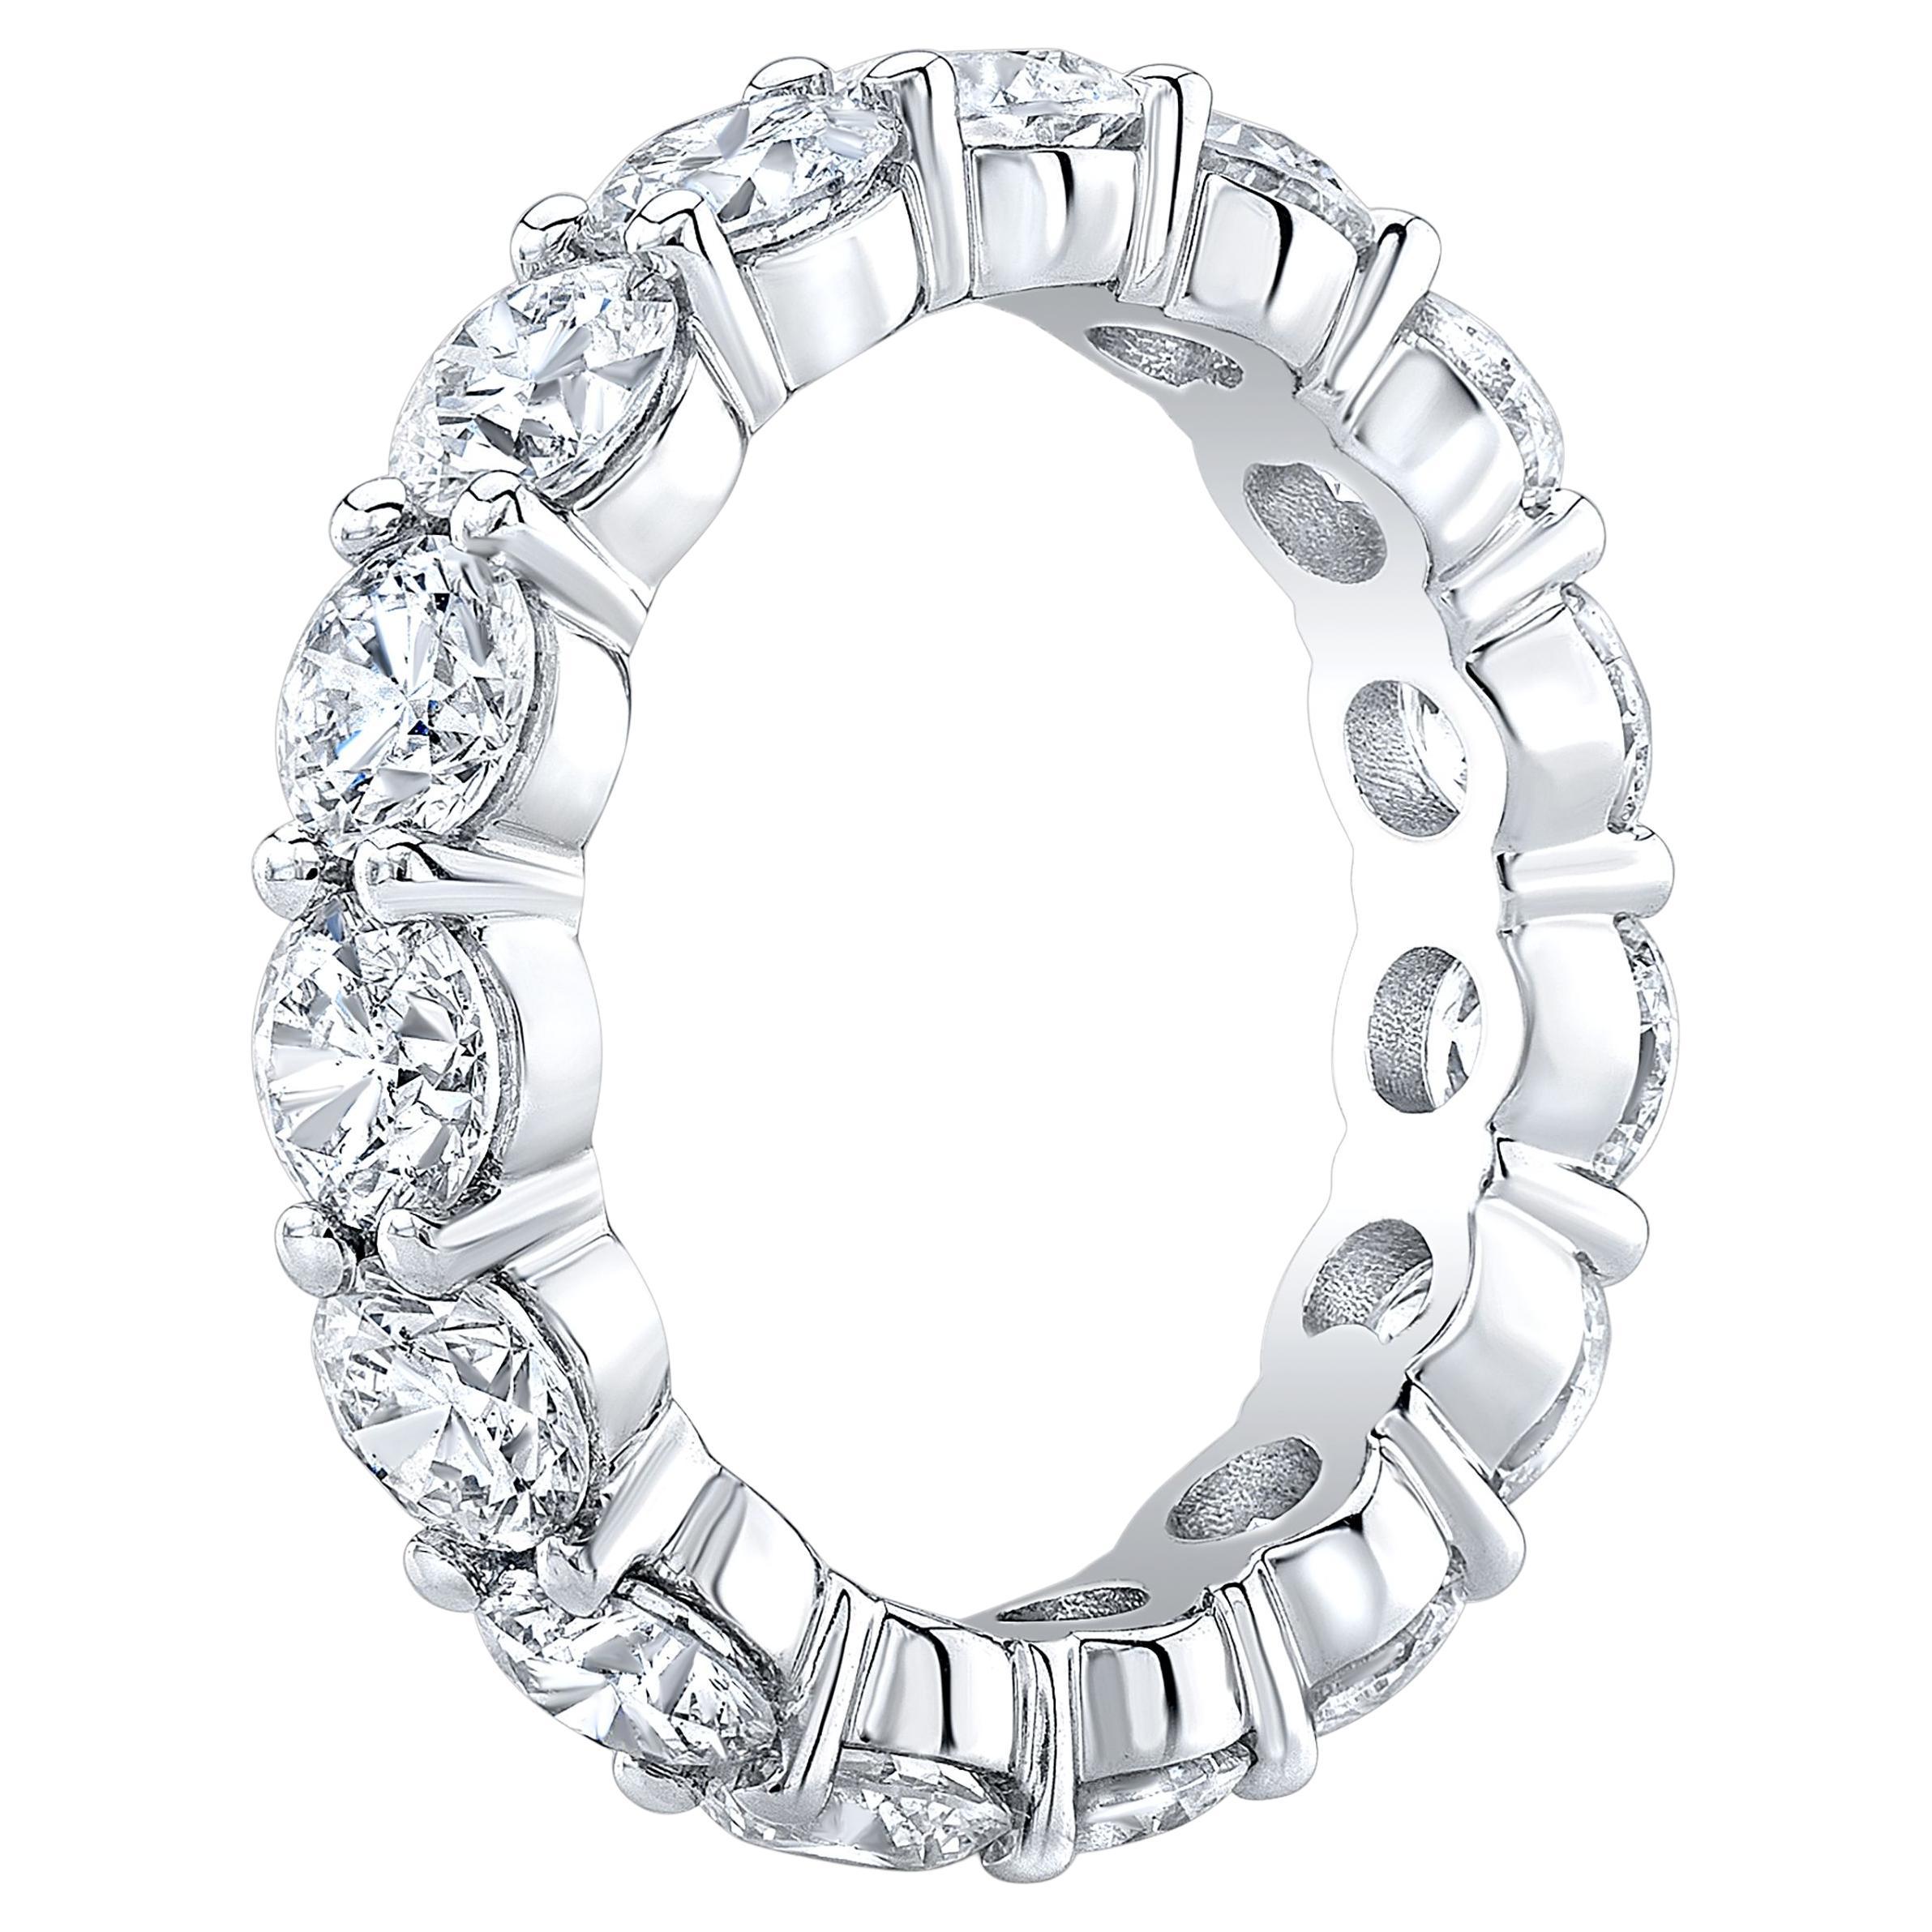 6 Carat Diamond Eternity Band Classic Round Cut G Color SI1 Clarity 14k Gold